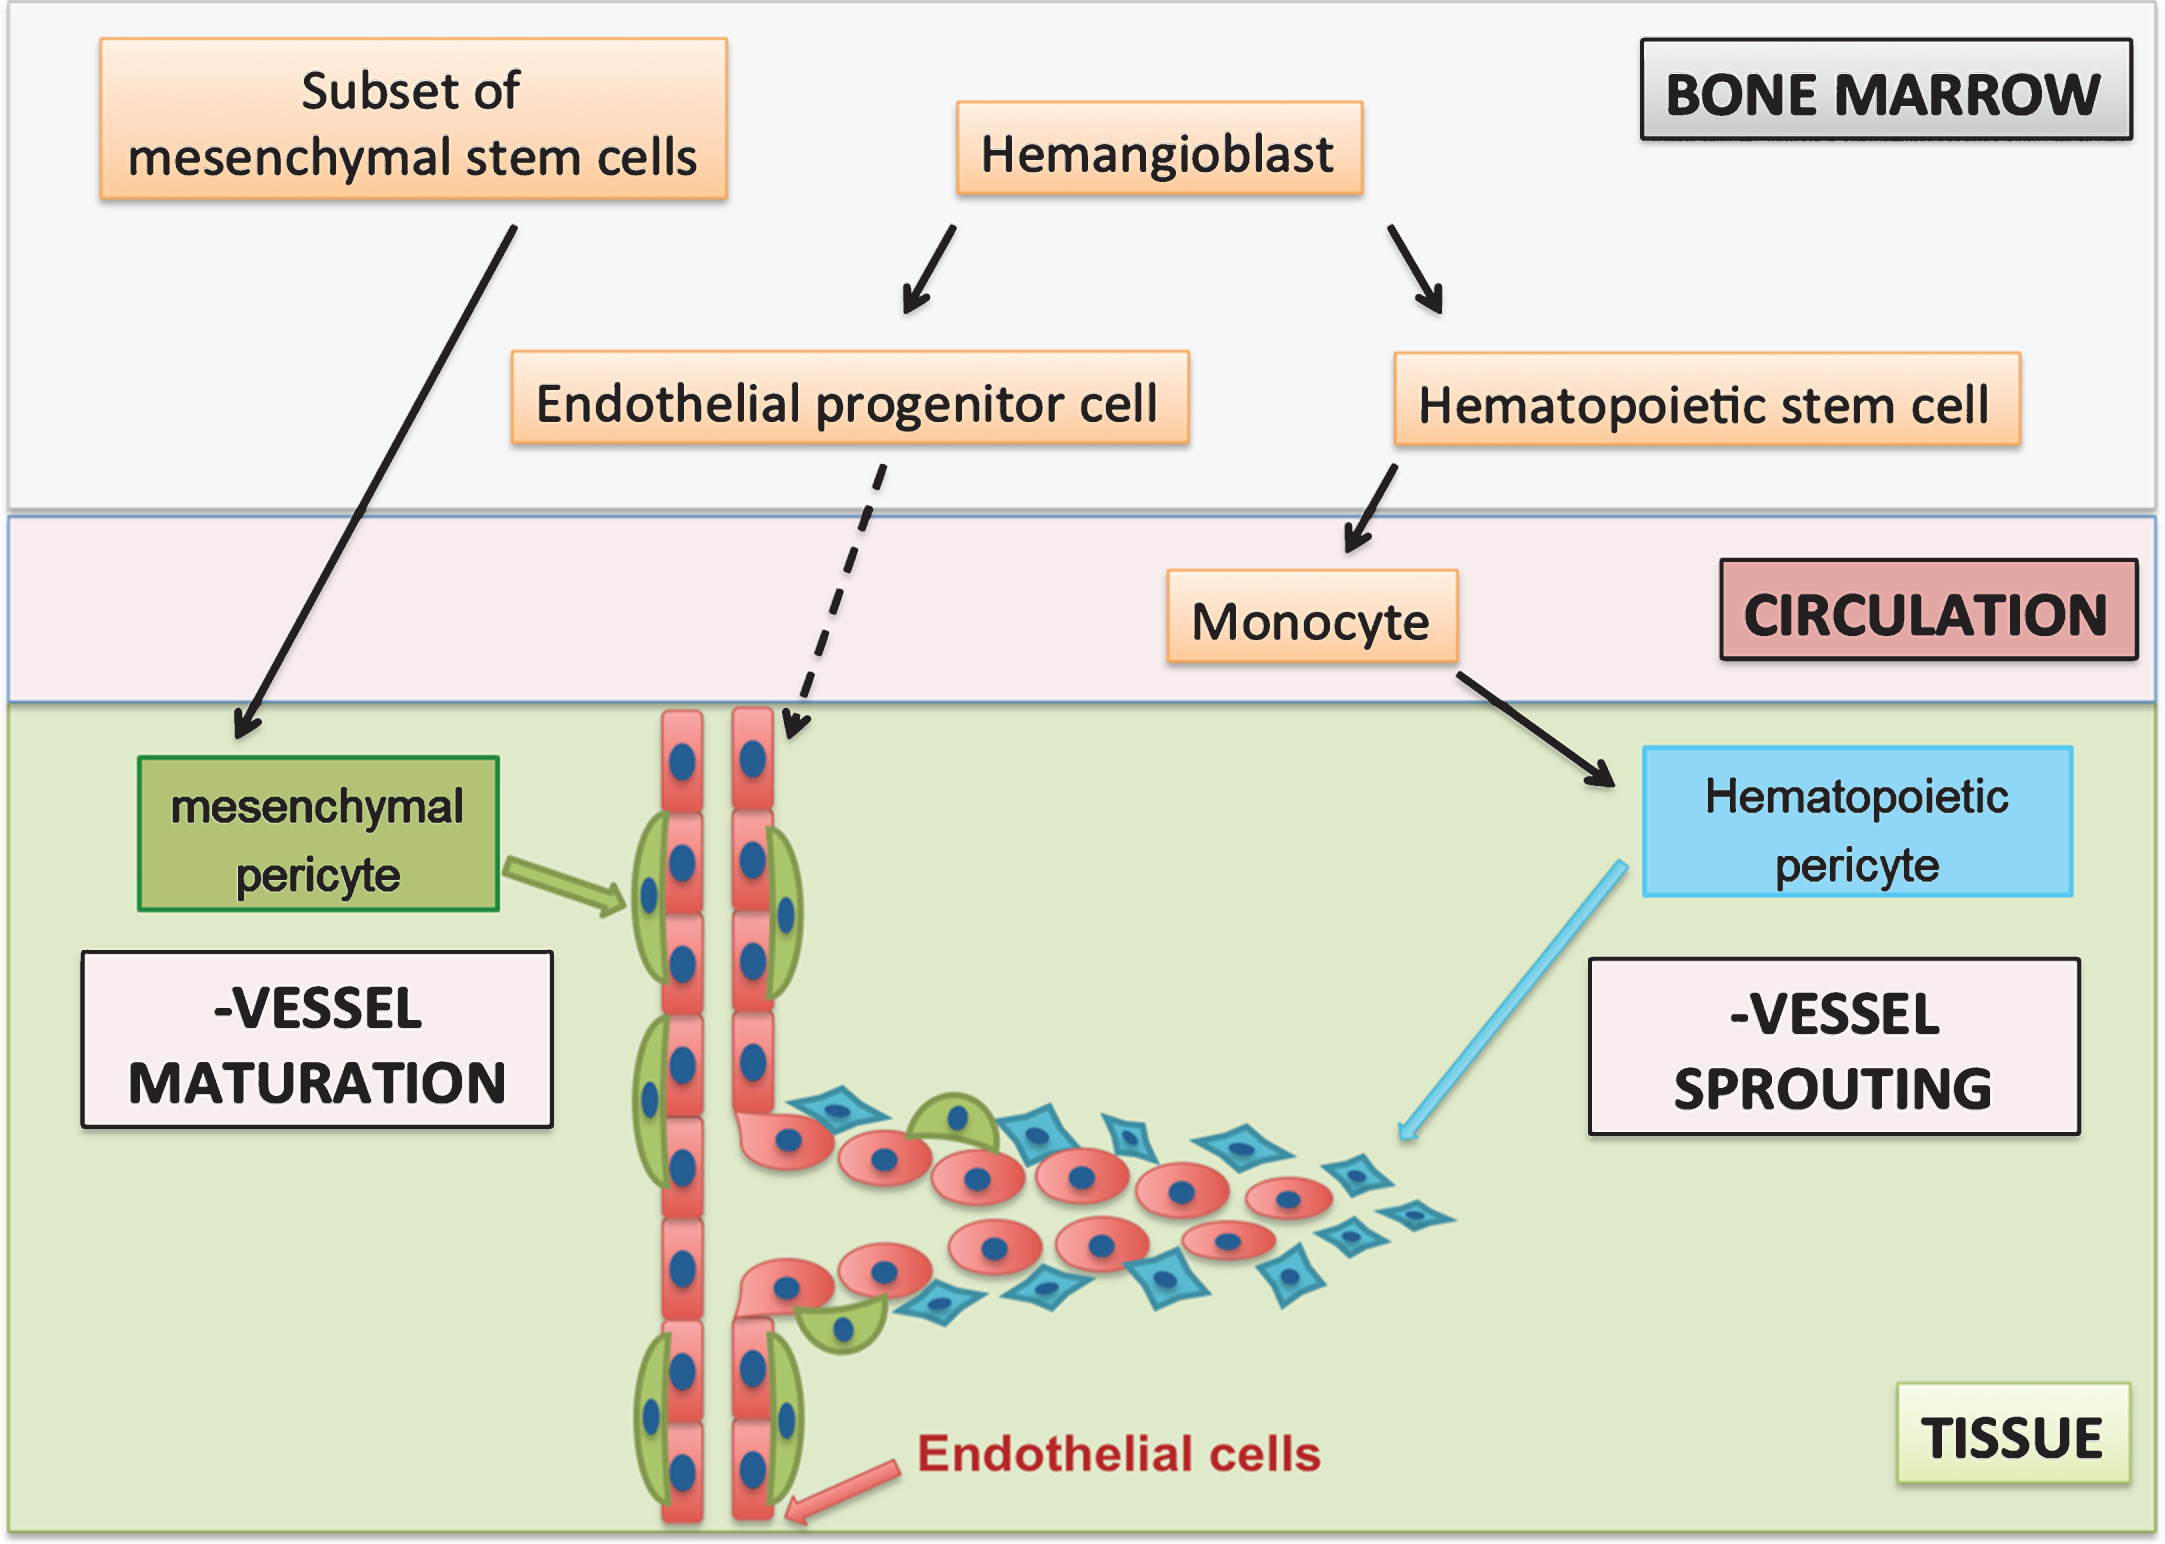 Hypothesis of two pericyte populations during angiogenesis. Hematopoietic pericytes have a monocytic origin and support early stages of angiogenesis, whereas mesenchymal pericytes are a subset of MSCs, which are present on mature vessels. Mesenchymal pericytes induce vessel maturation and stabilisation at later stages of angiogenesis.